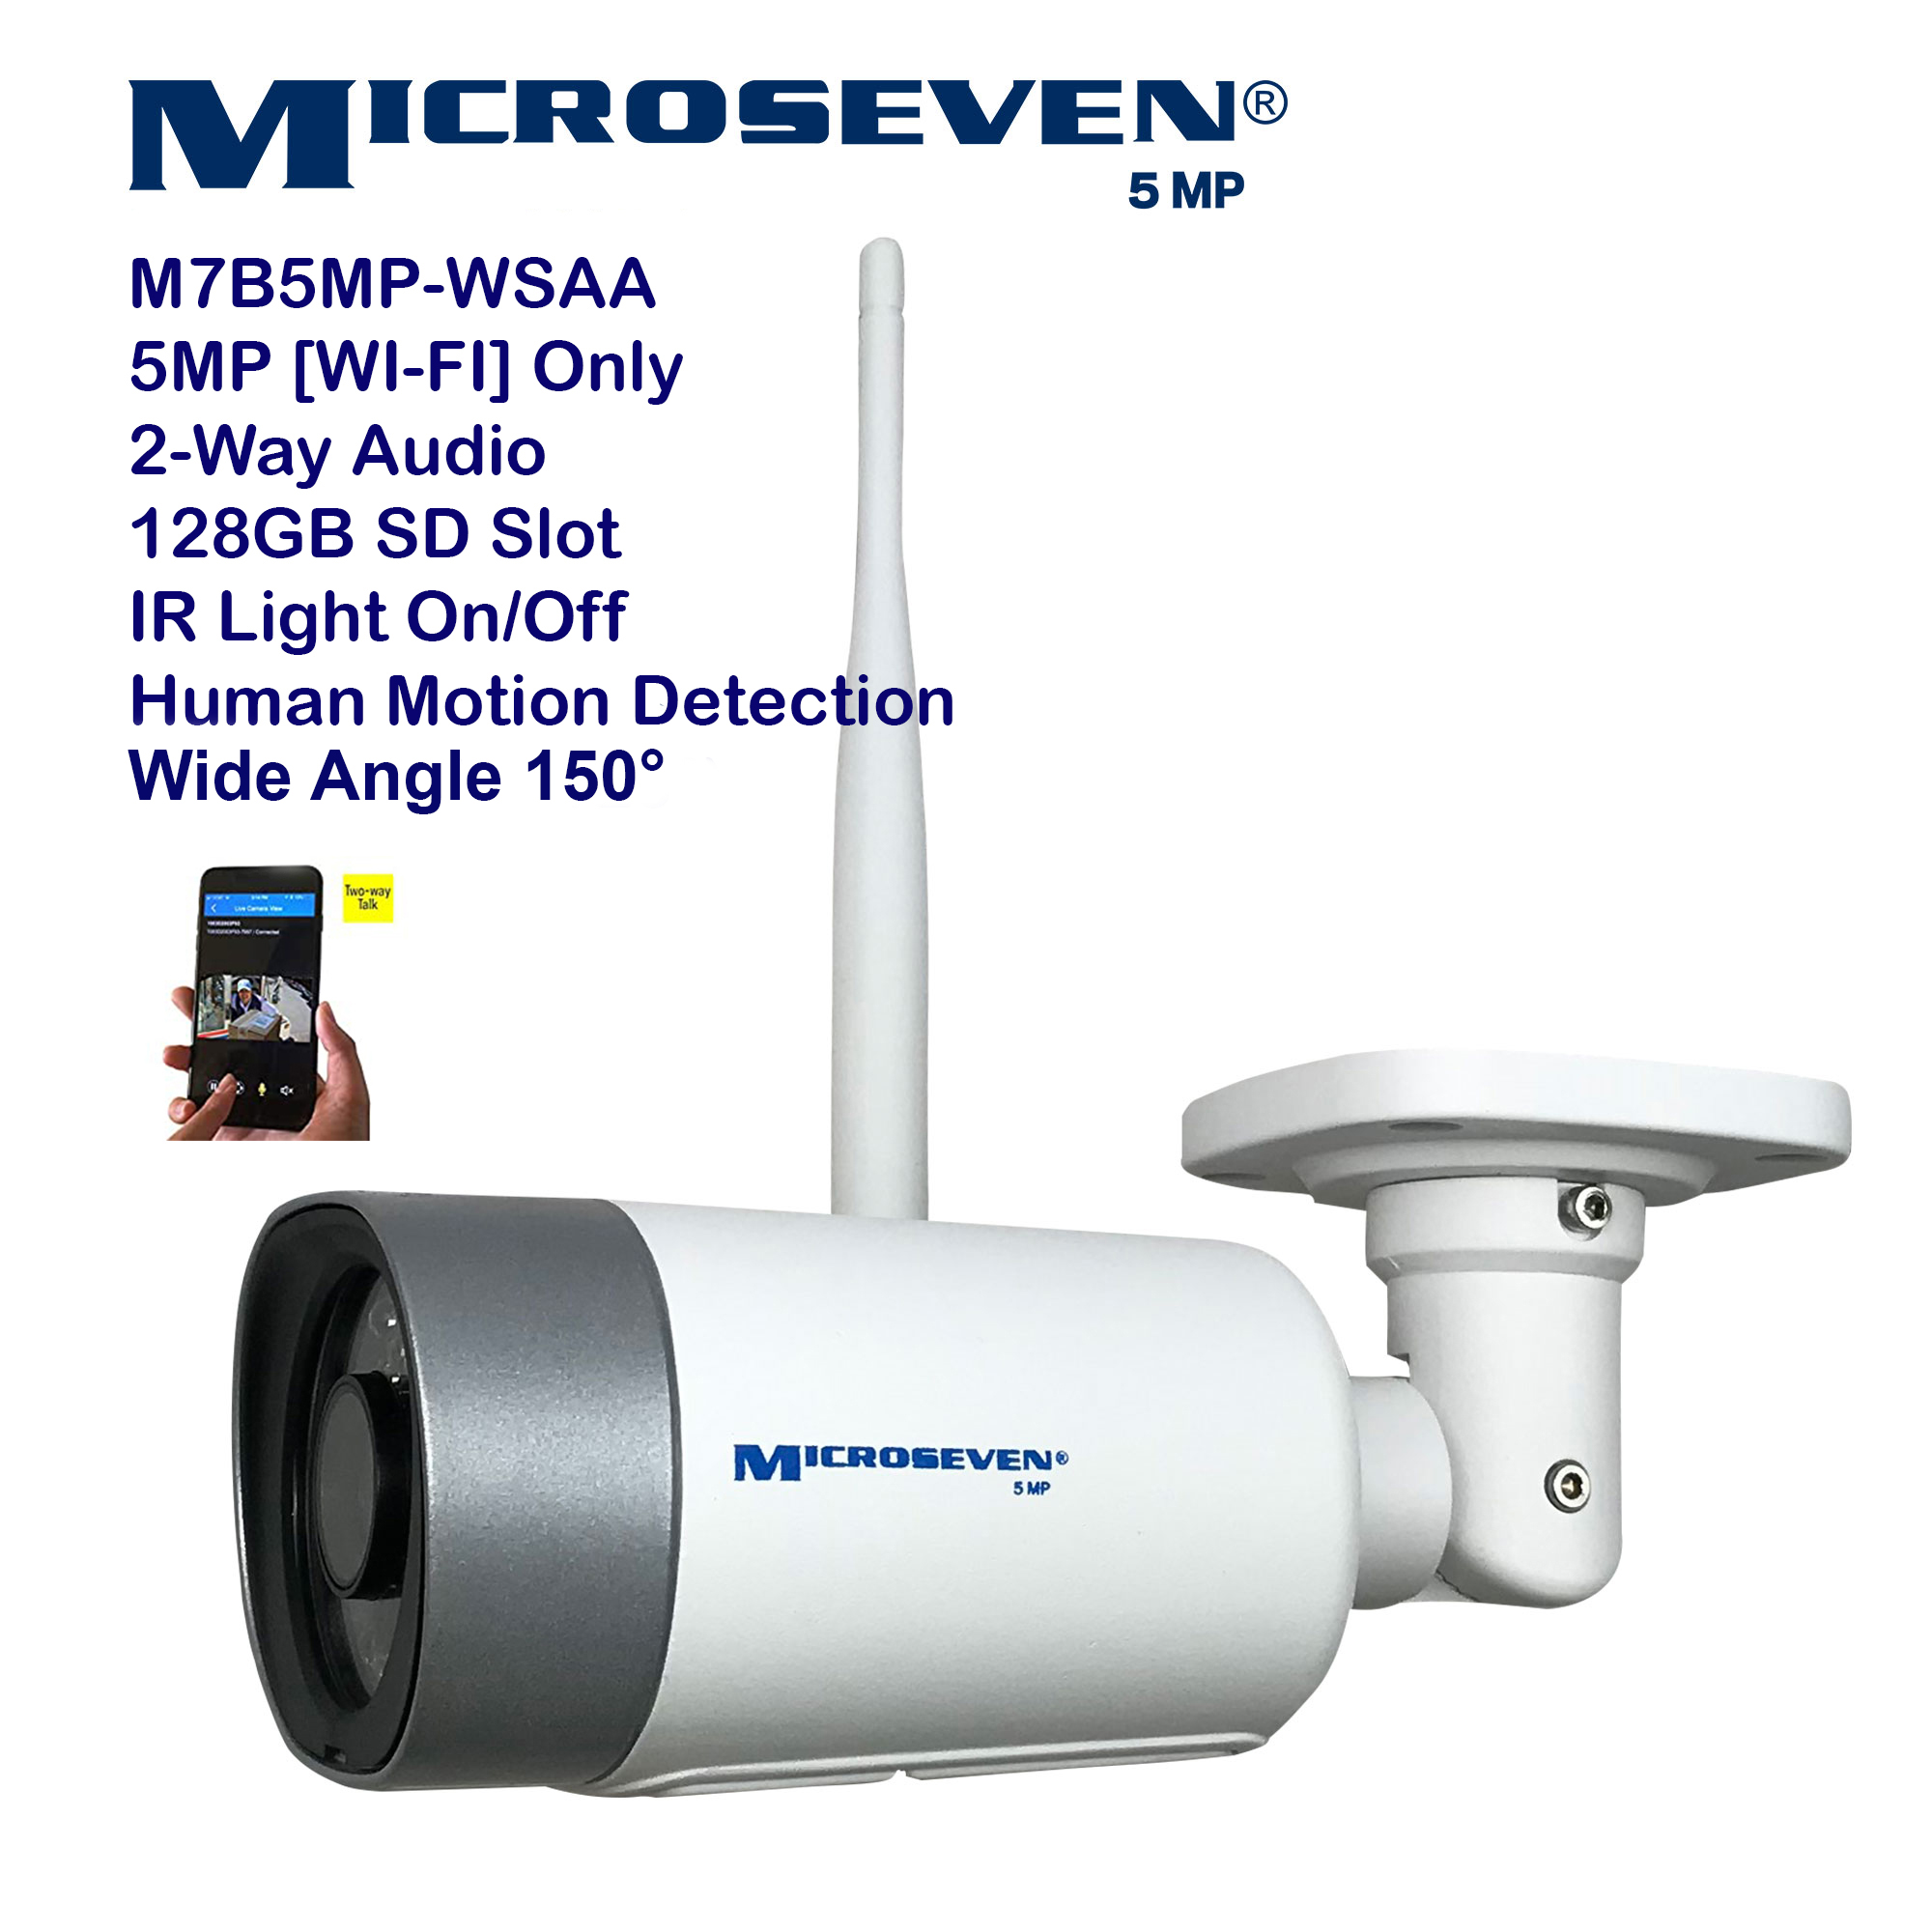 Microseven (2020)Open Source 5MP (2560x1920) UltraHD [ Wi - Fi ] or Wired SONY 1/2.8" Chipset CMOS 2.8mm 5MP Lens Wide Angle (150°)  Two-Way Audio with Built-in Amplified Microphone and Speaker plug and Play ONVIF, IR Light (On/Off in the APP) Security Indoor / Outdoor IP Camera, A.I. Human Motion Detection, 128GB SD Slot, Day & Night, Web GUI & Apps, VMS (Video Management System) Free 24hr M7 Cloud Storage, Works with Alexa with No Monthly Fee+ Broadcasting on YouTube, Facebook & Microseven.tv